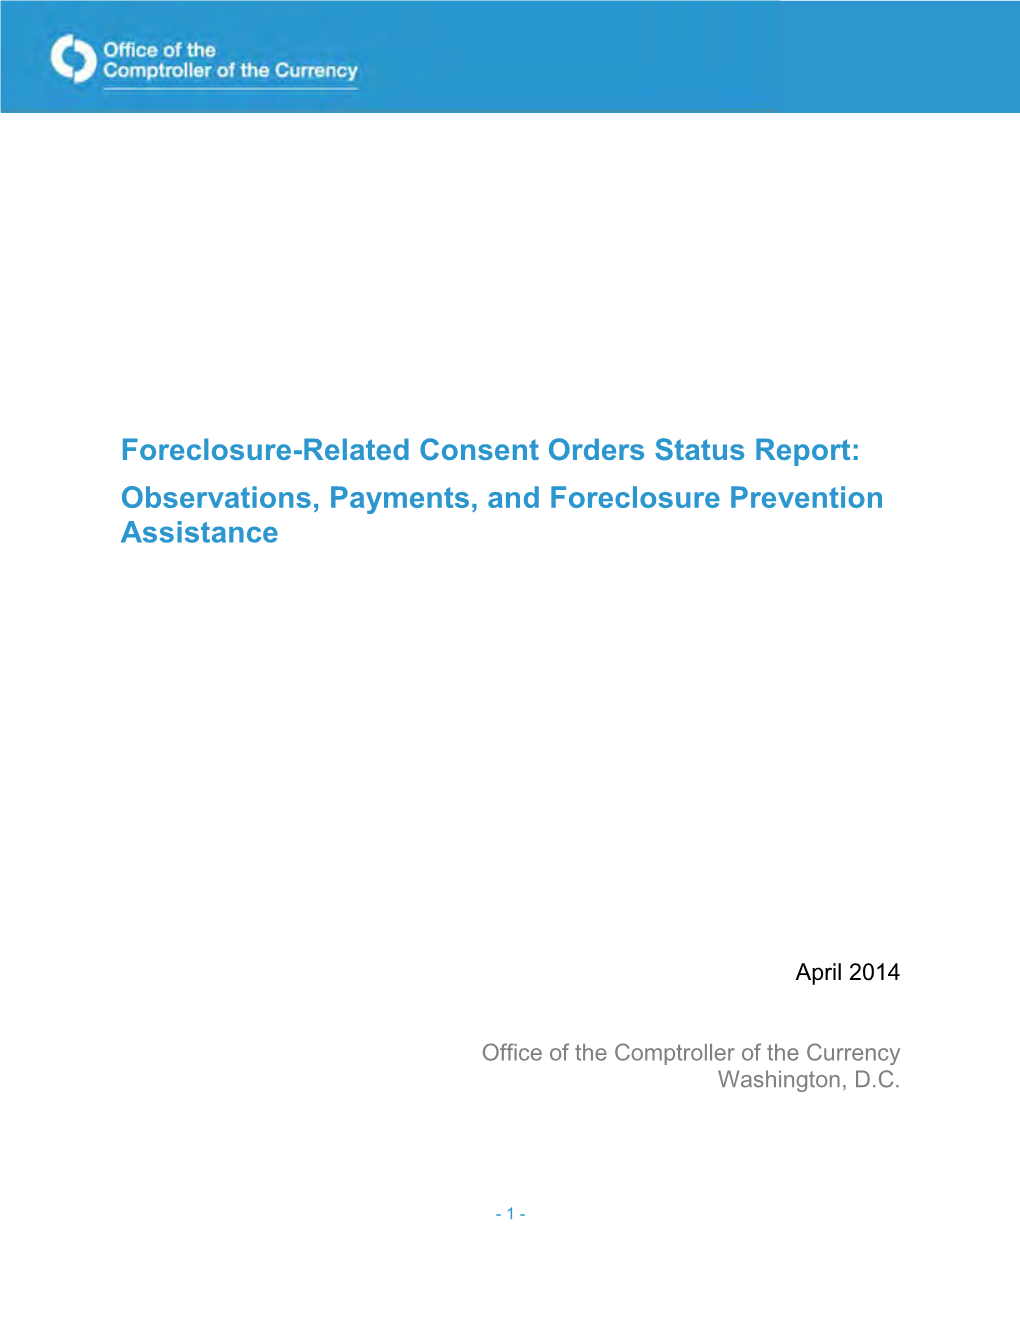 Foreclosure-Related Consent Orders Status Report: Observations, Payments, and Foreclosure Prevention Assistance